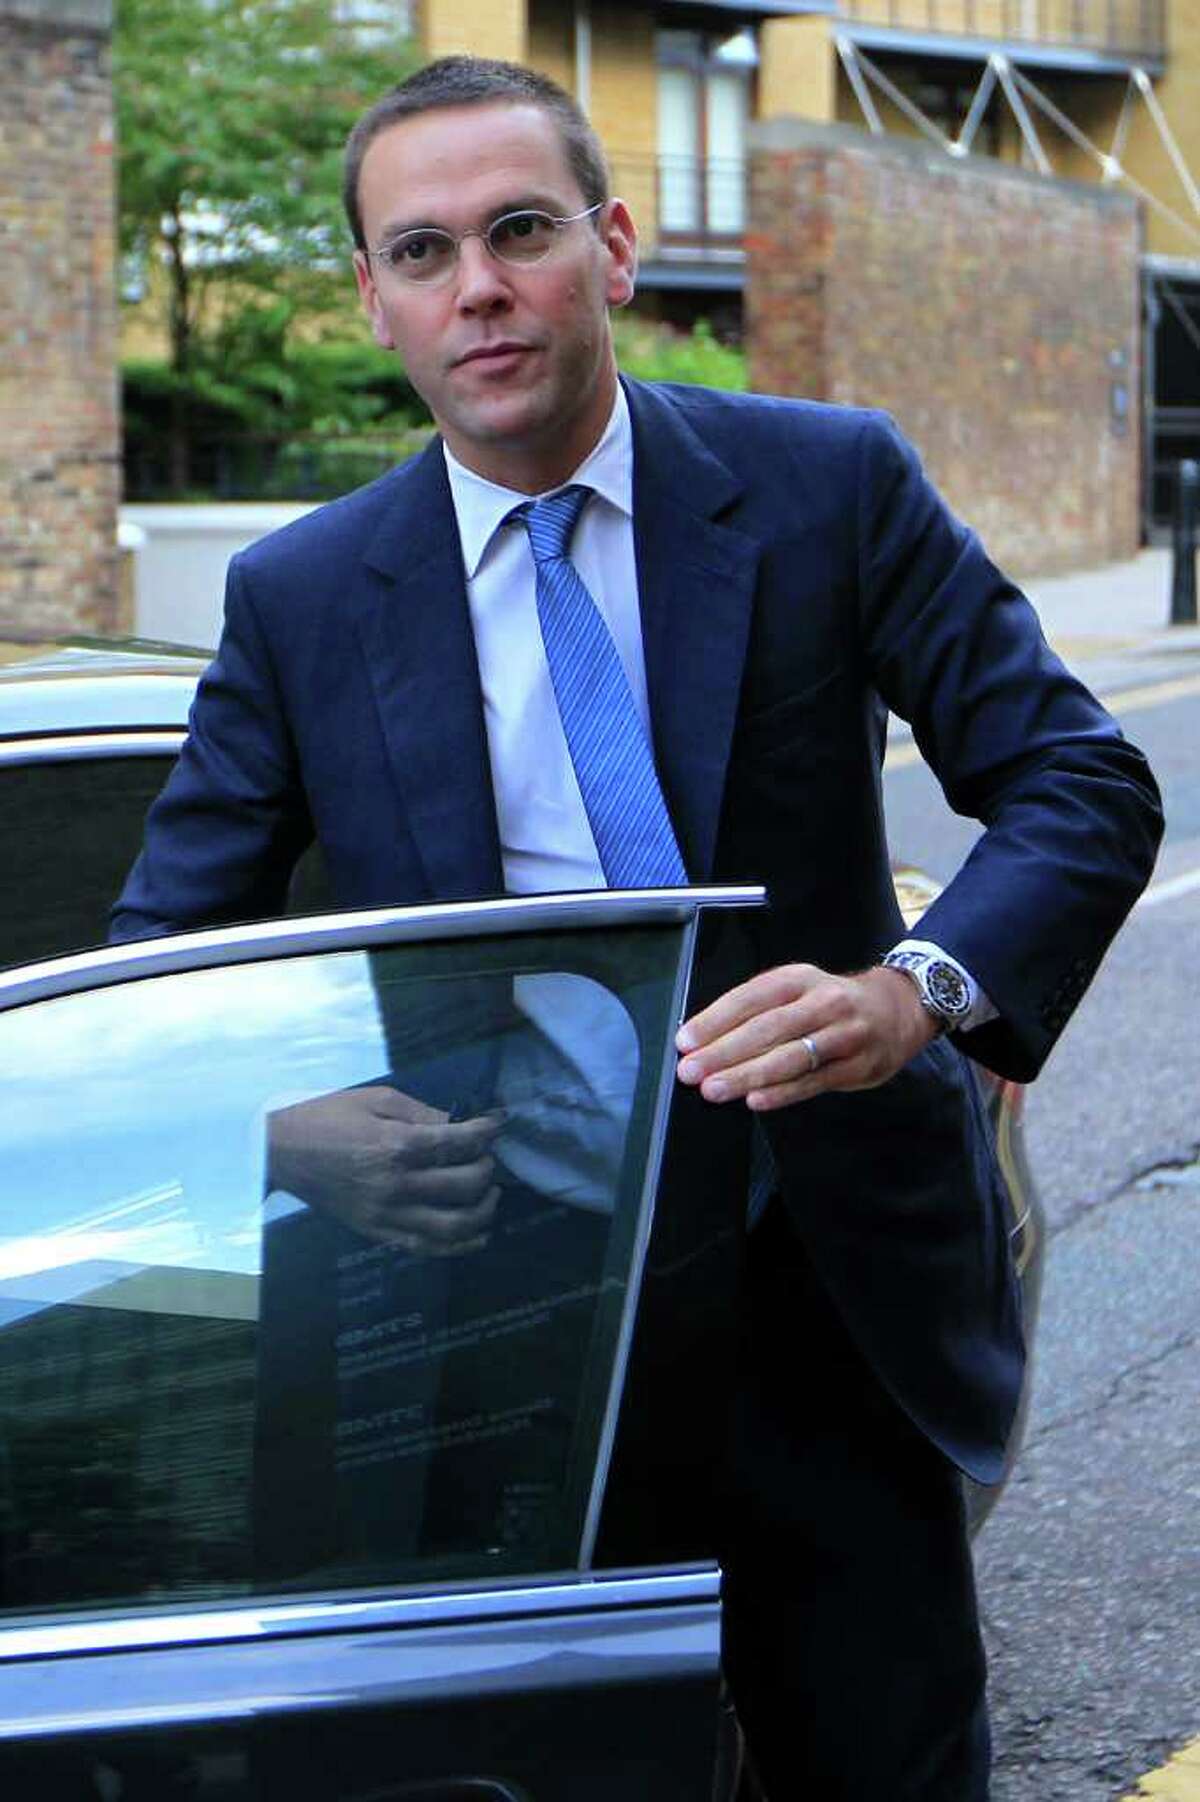 FILE - In this July 19, 2011 file photo, chief executive of News Corporation Europe and Asia, James Murdoch, arrives at the News International headquarters in London. A letter from former News of the World reporter Clive Goodman obtained by the Guardian says that phone hacking was widely discussed and expressly endorsed by senior journalists at the now-defunct tabloid. The newspaper said Tuesday, Aug. 16, 2011 that the letter - written by Goodman four years ago after he was released from prison - claimed that the illegal eavesdropping was carried out with "the full knowledge and support" of the paper's leadership. (AP Photo/Sang Tan, File)